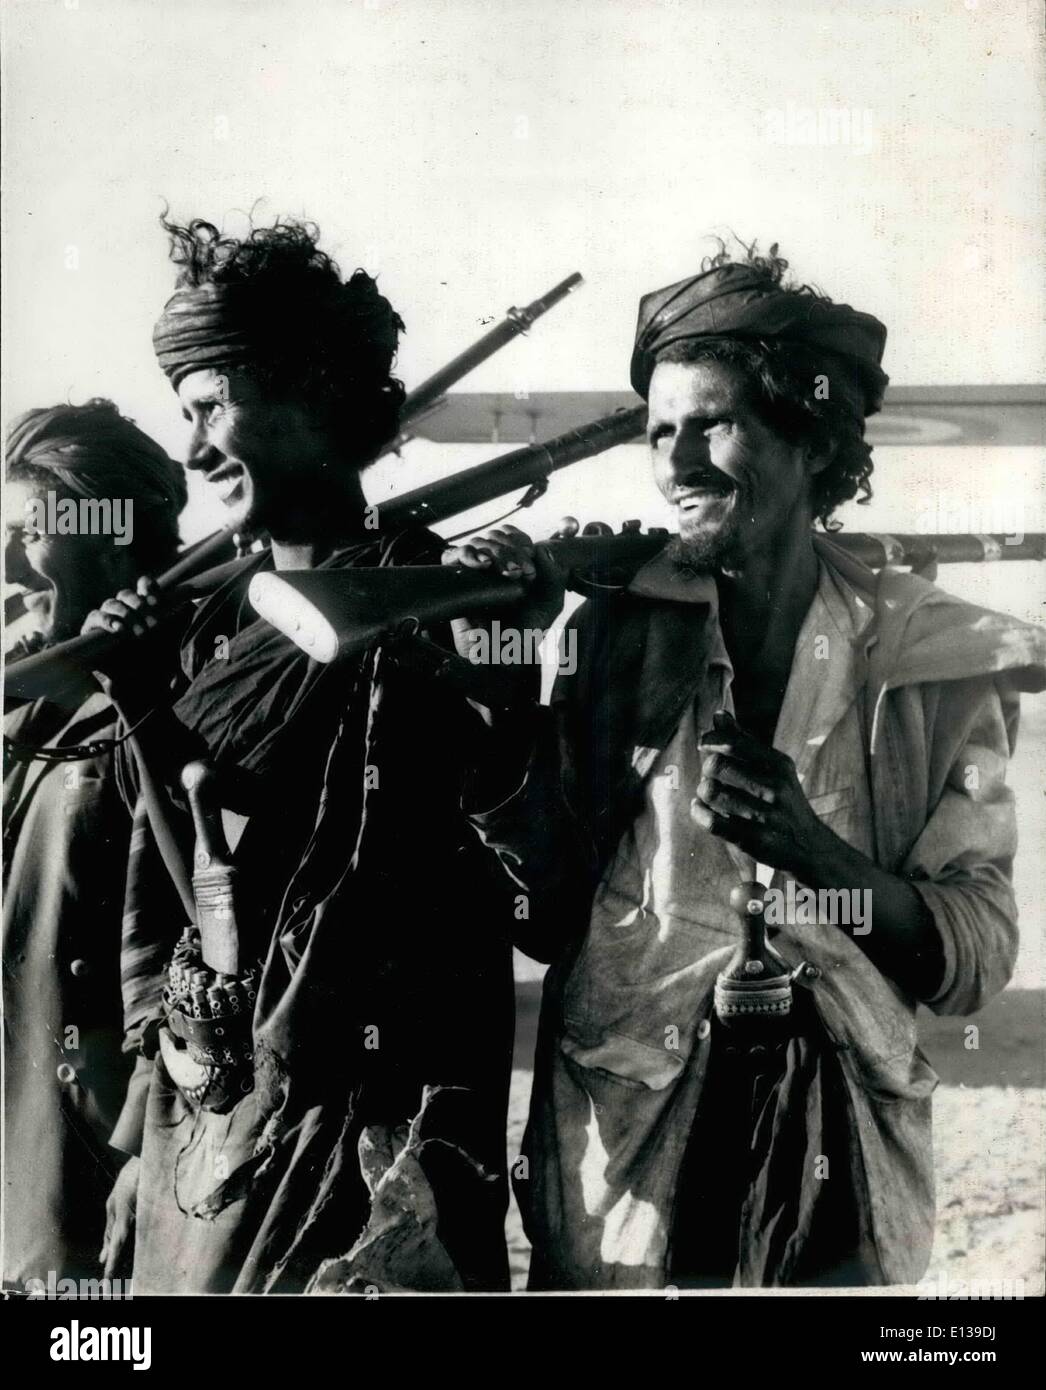 Feb. 29, 2012 - Mercenary Tribesmen On The AD N-YEMEN Frontier; These tribal warriors, in British pay, back up the regular forces in their patrolling and on skirmishes. They have a free hand in most things, and some and go as they please. Stock Photo